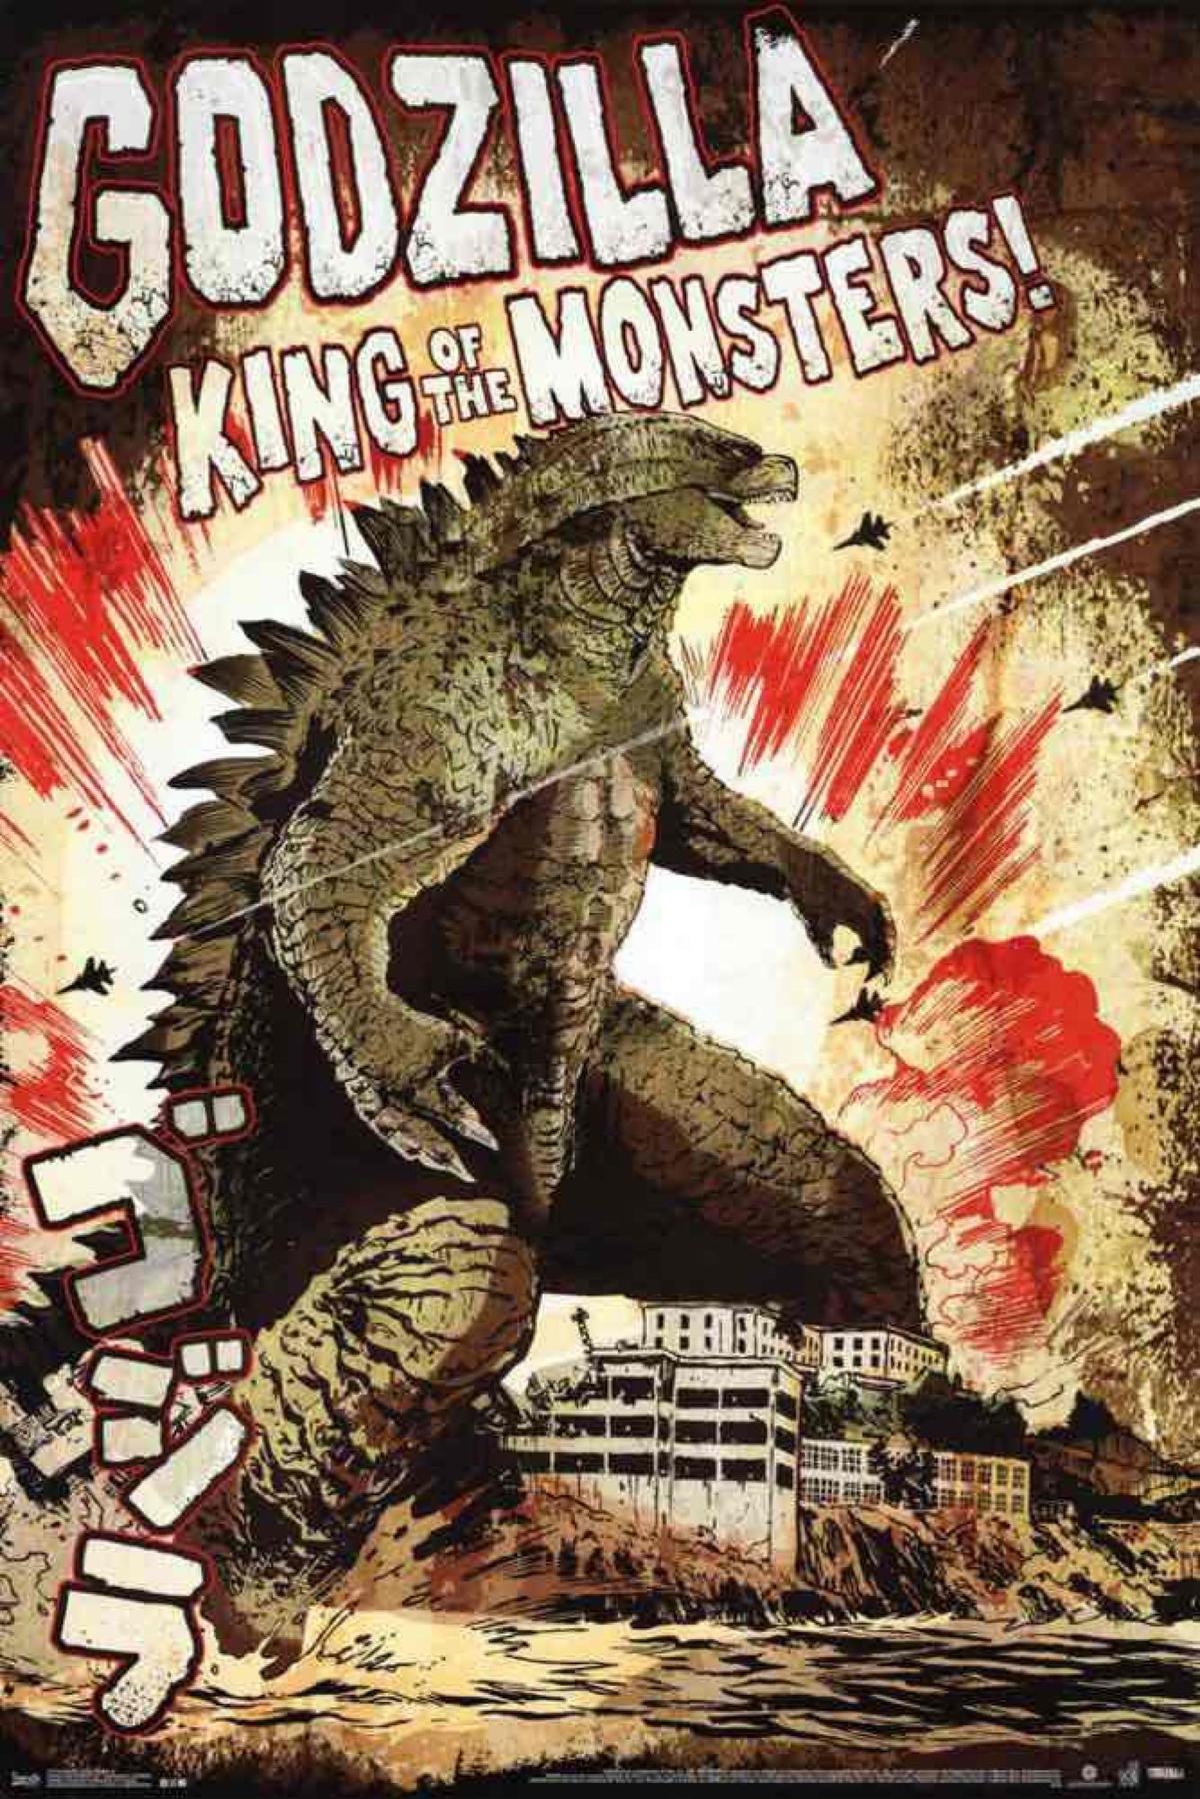 Godzilla King of Monsters Movie Poster